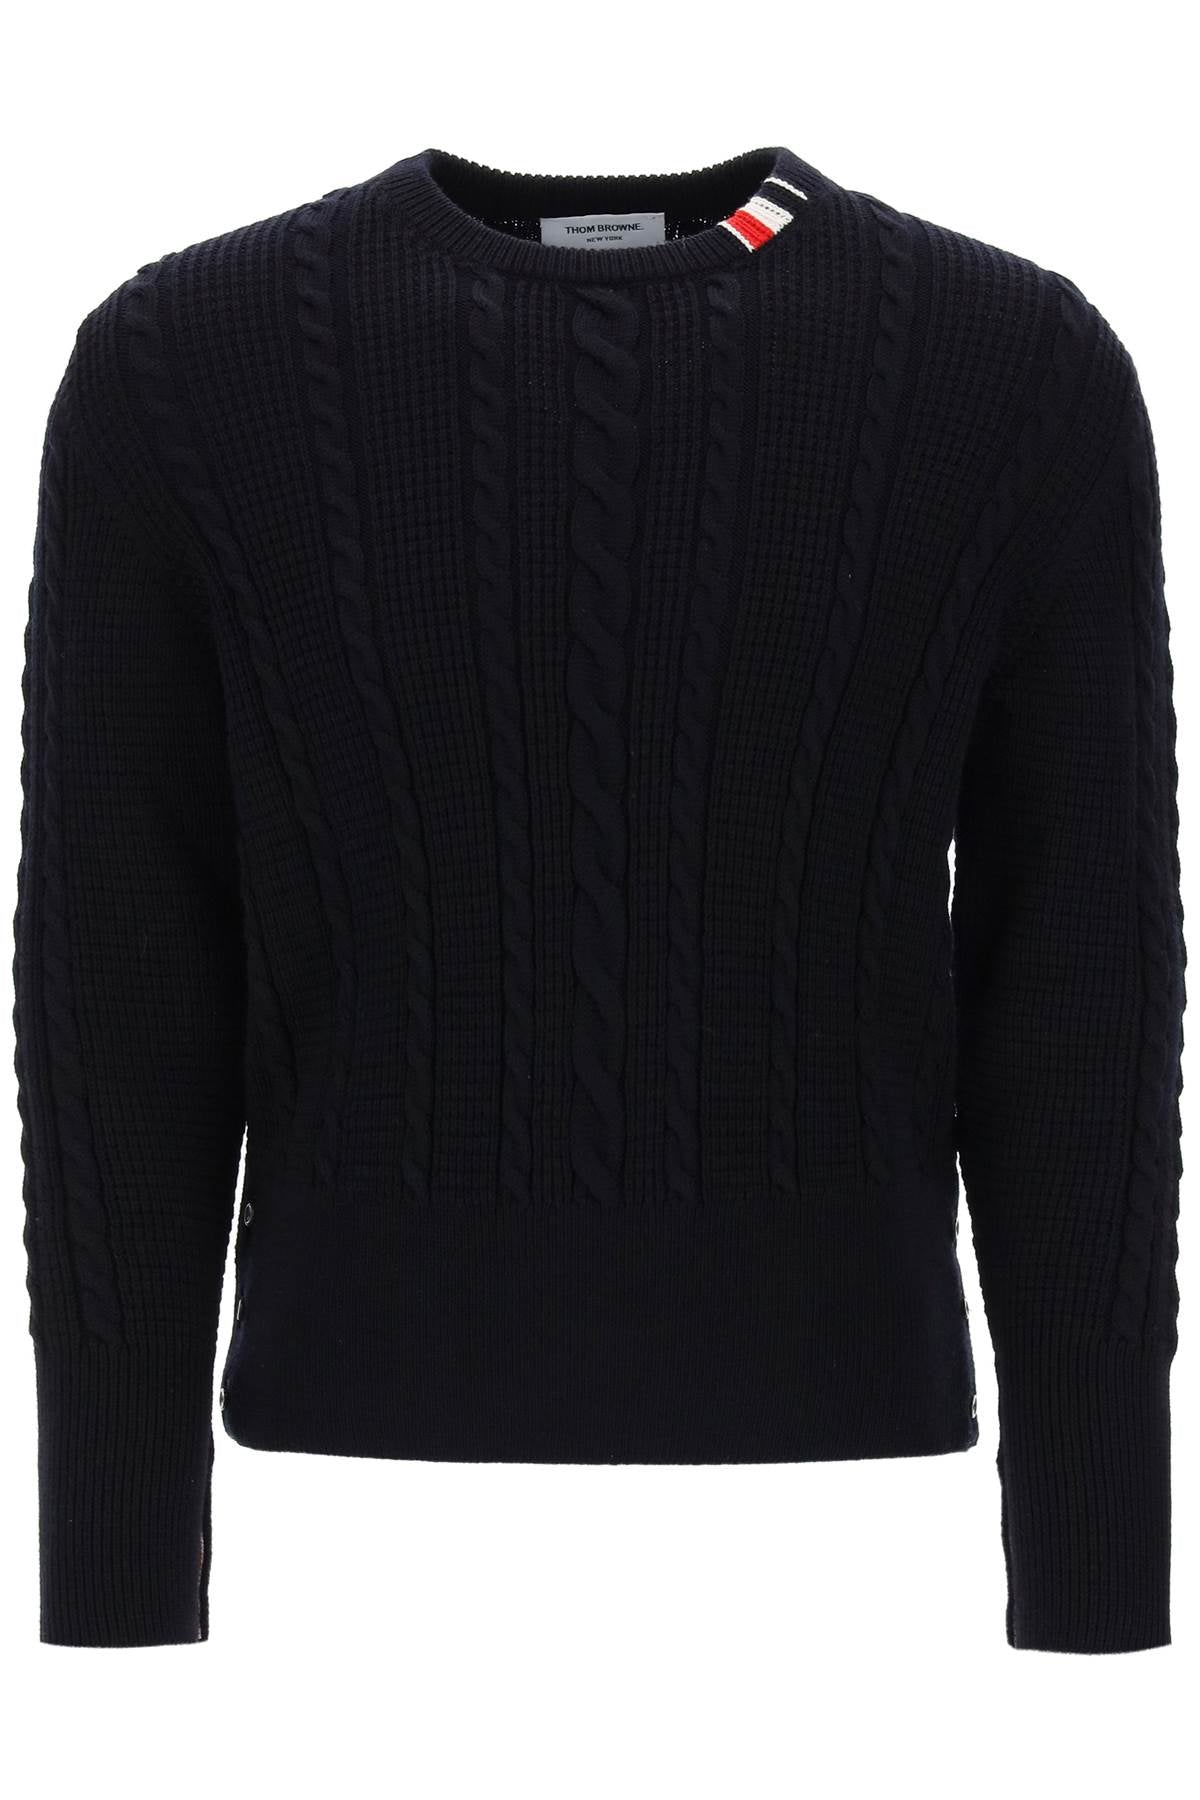 Thom browne cable wool sweater with rwb detail-0